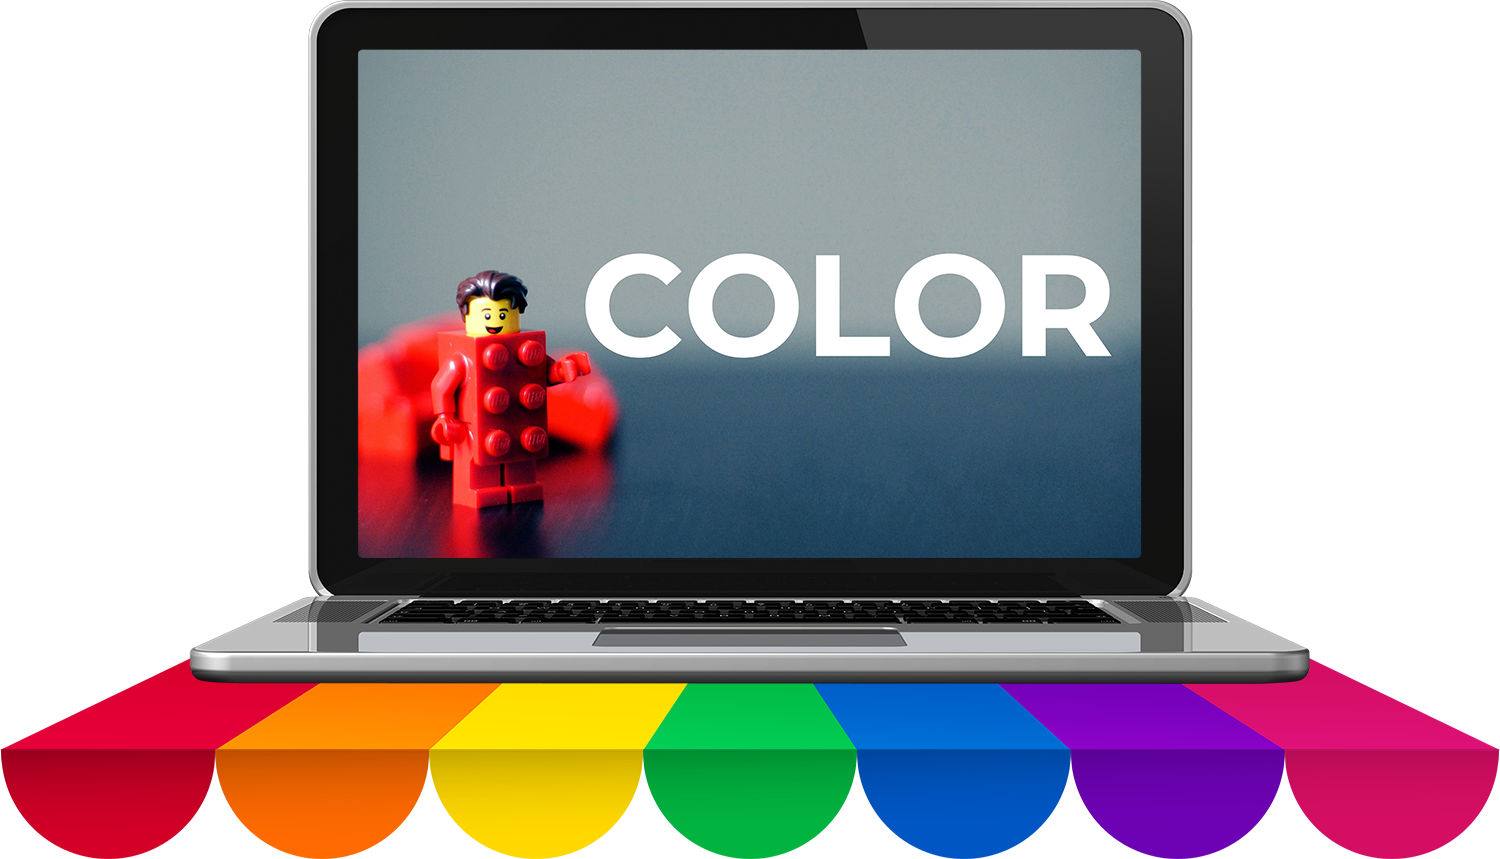 After the building blocks of design, we explore Color!